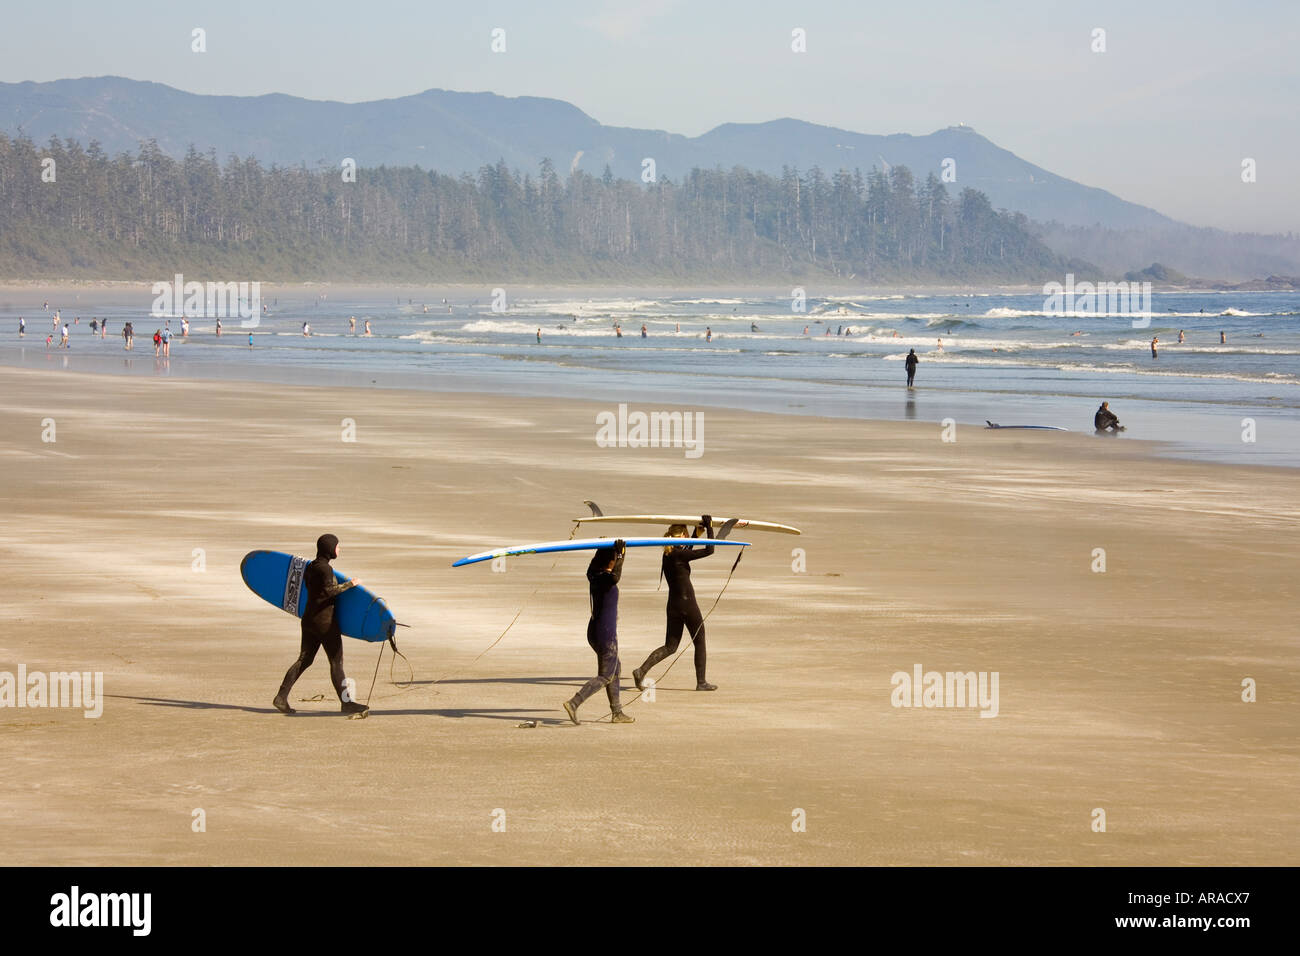 Surfers carrying boards on Long Beach Pacific Rim national park reserve Vancouver island Canada Stock Photo